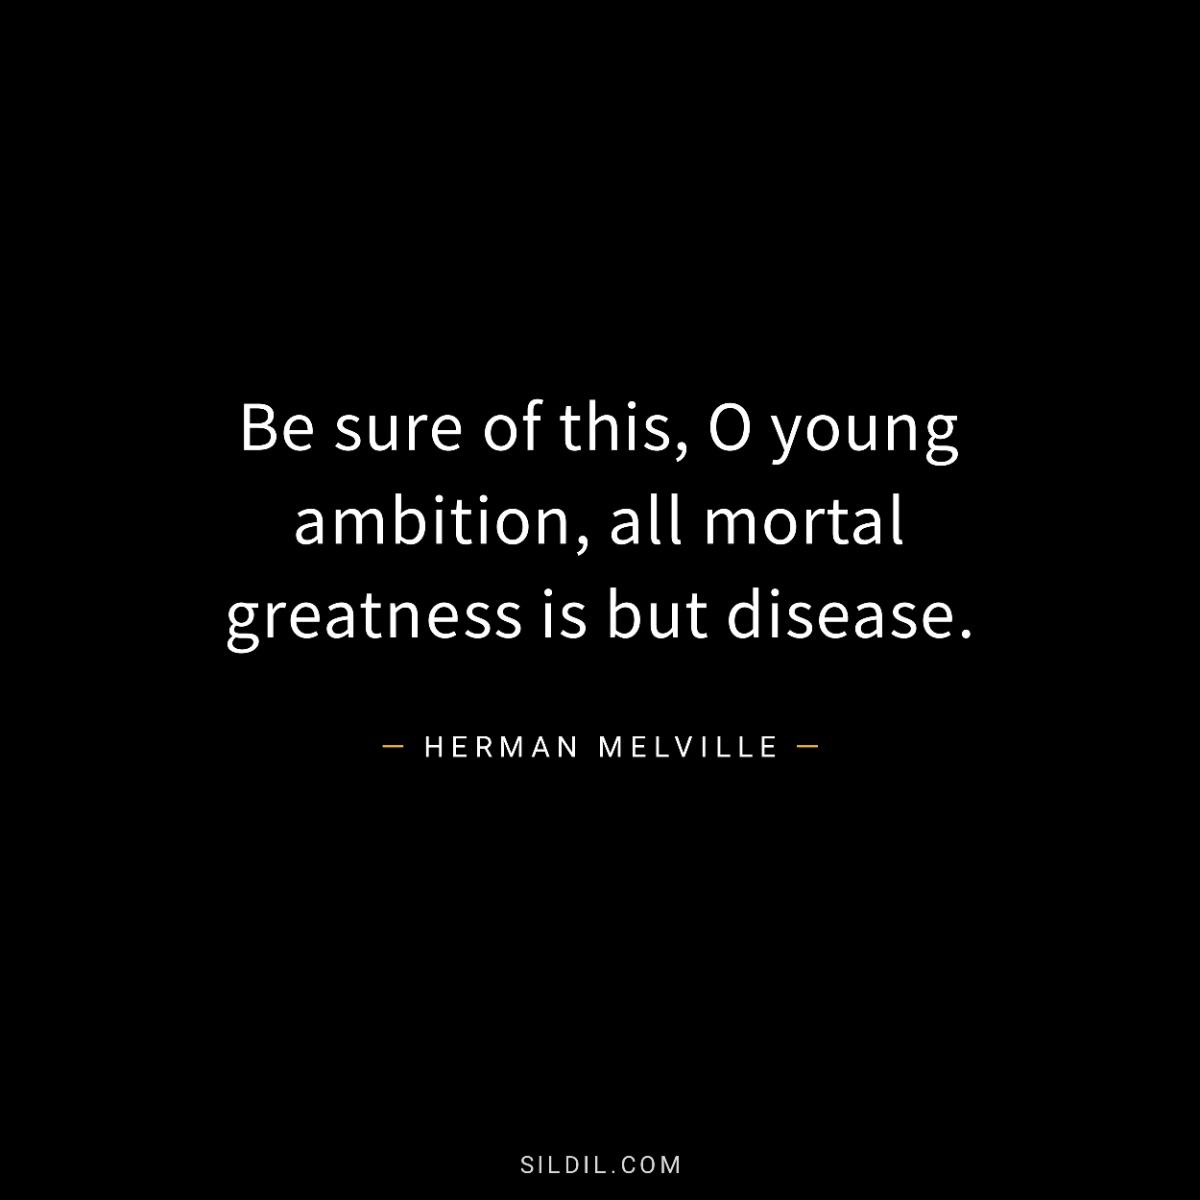 Be sure of this, O young ambition, all mortal greatness is but disease.